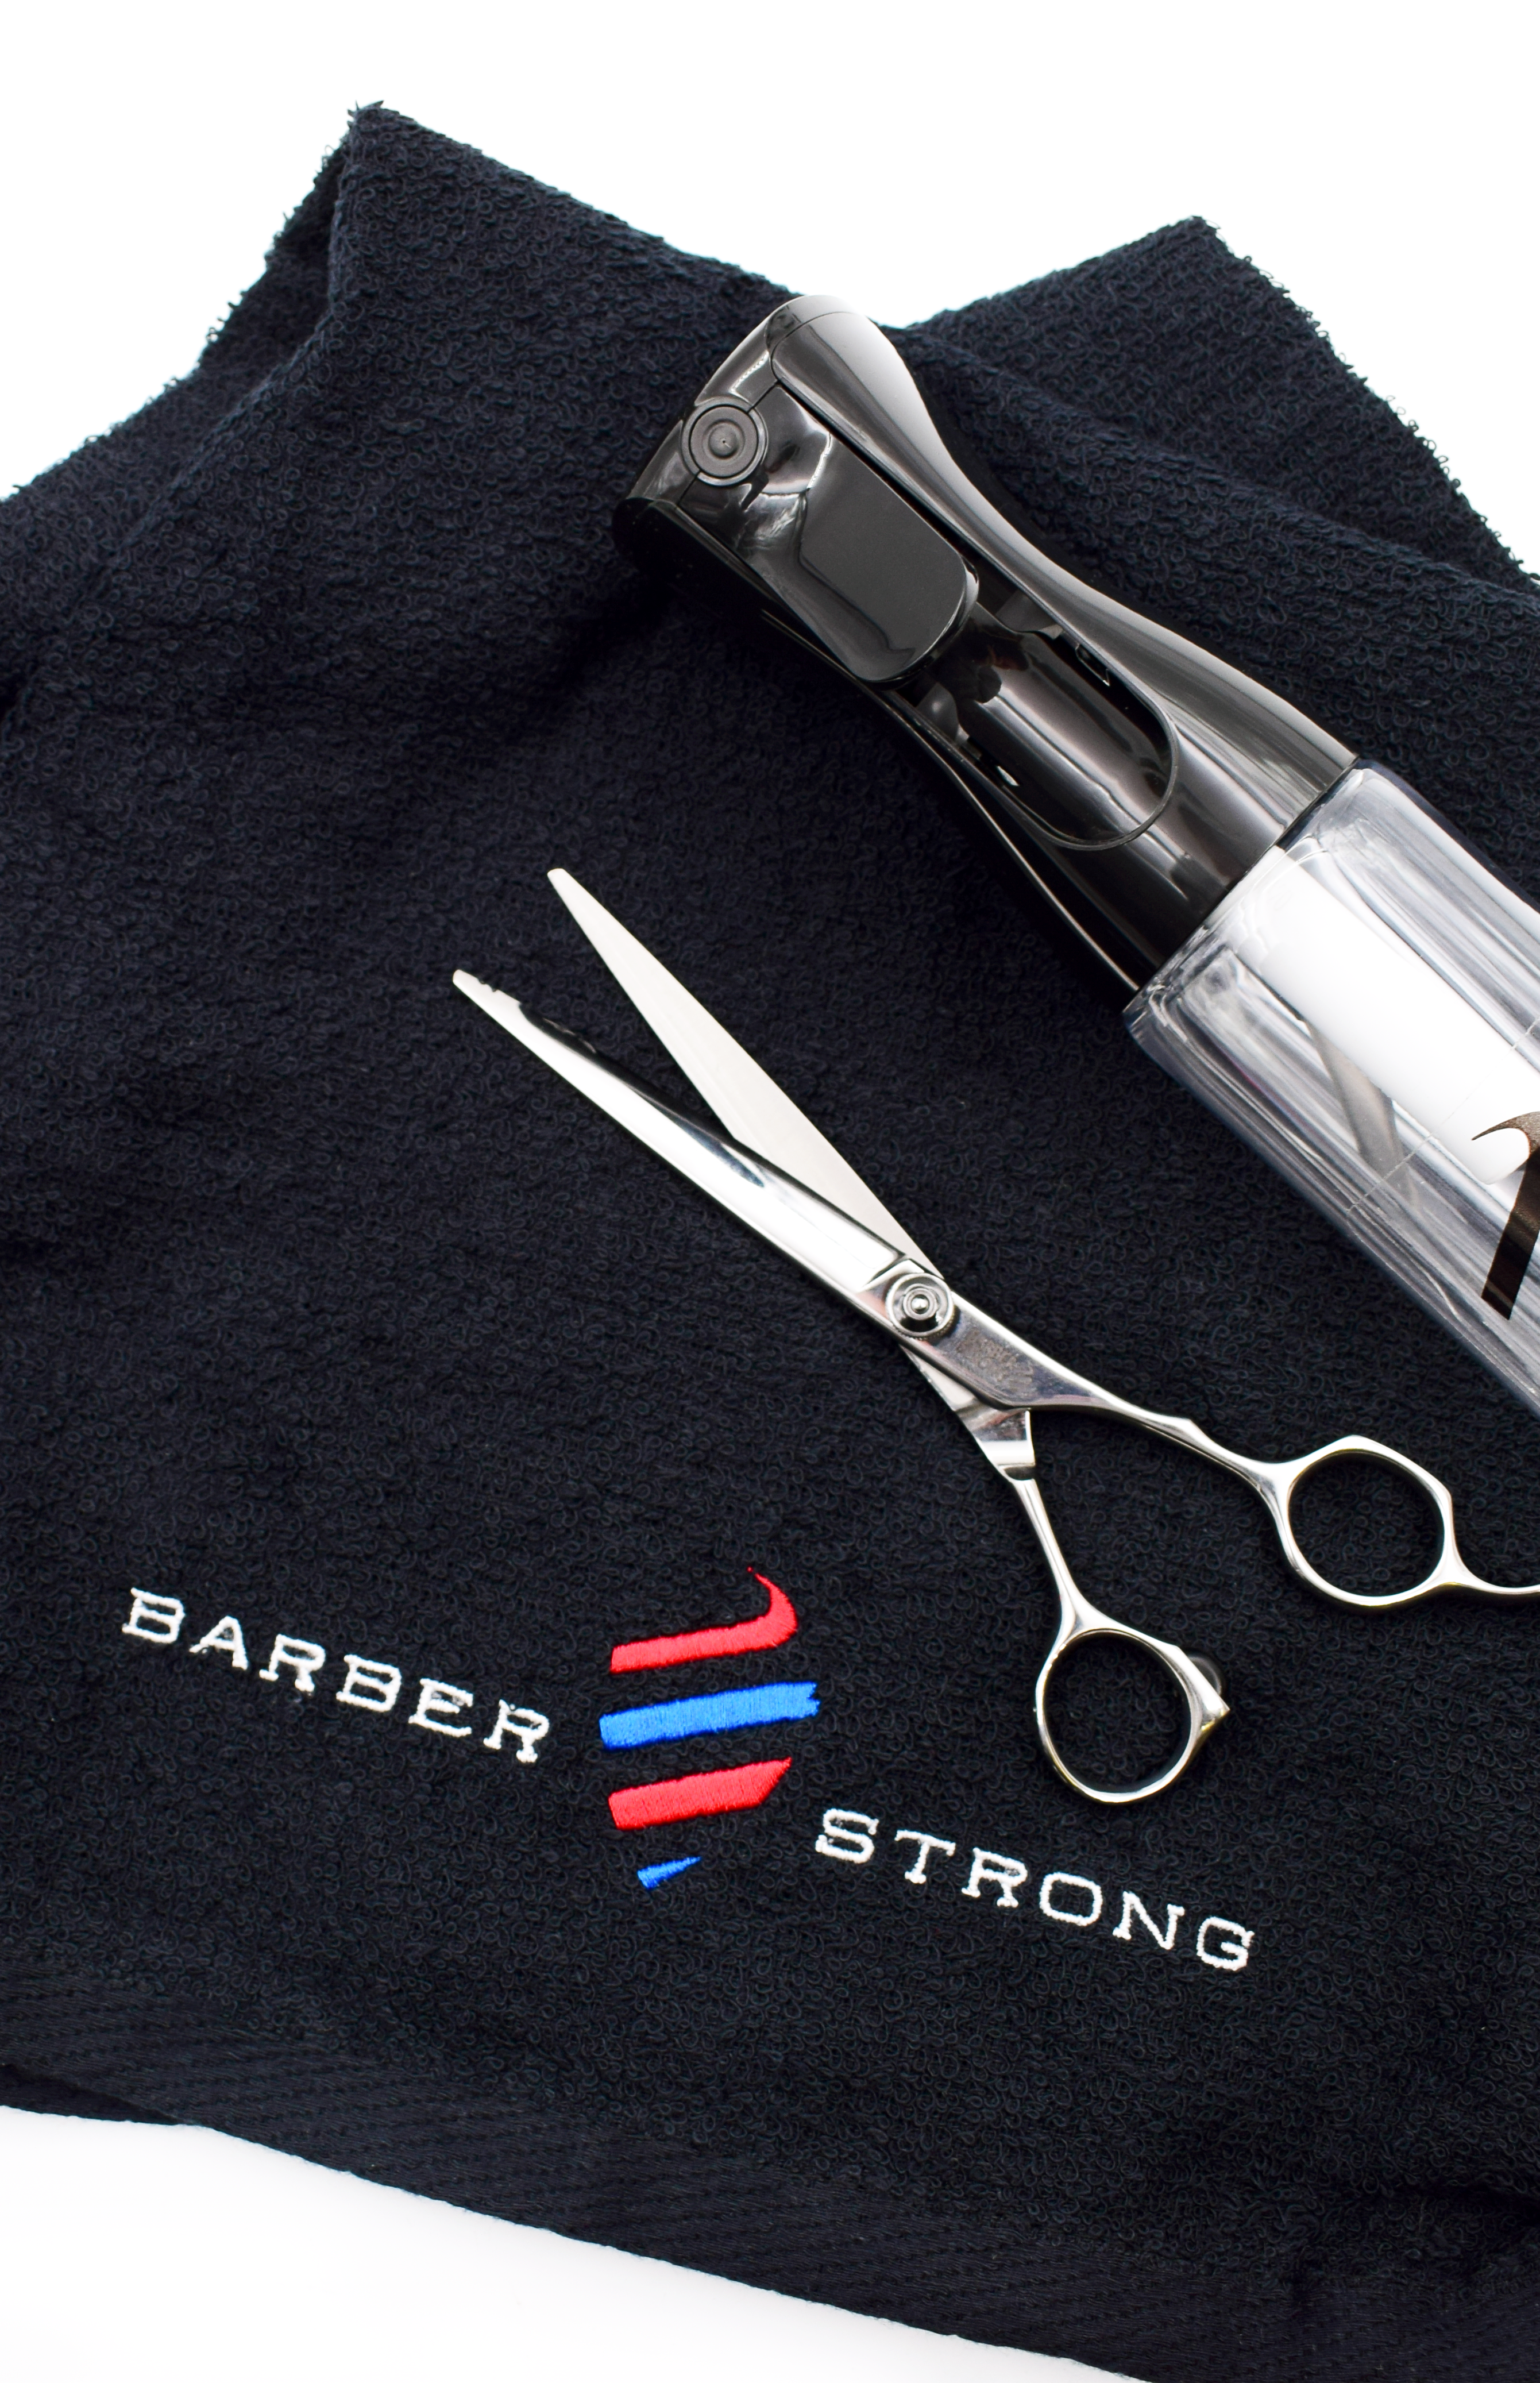 The Barber Towel